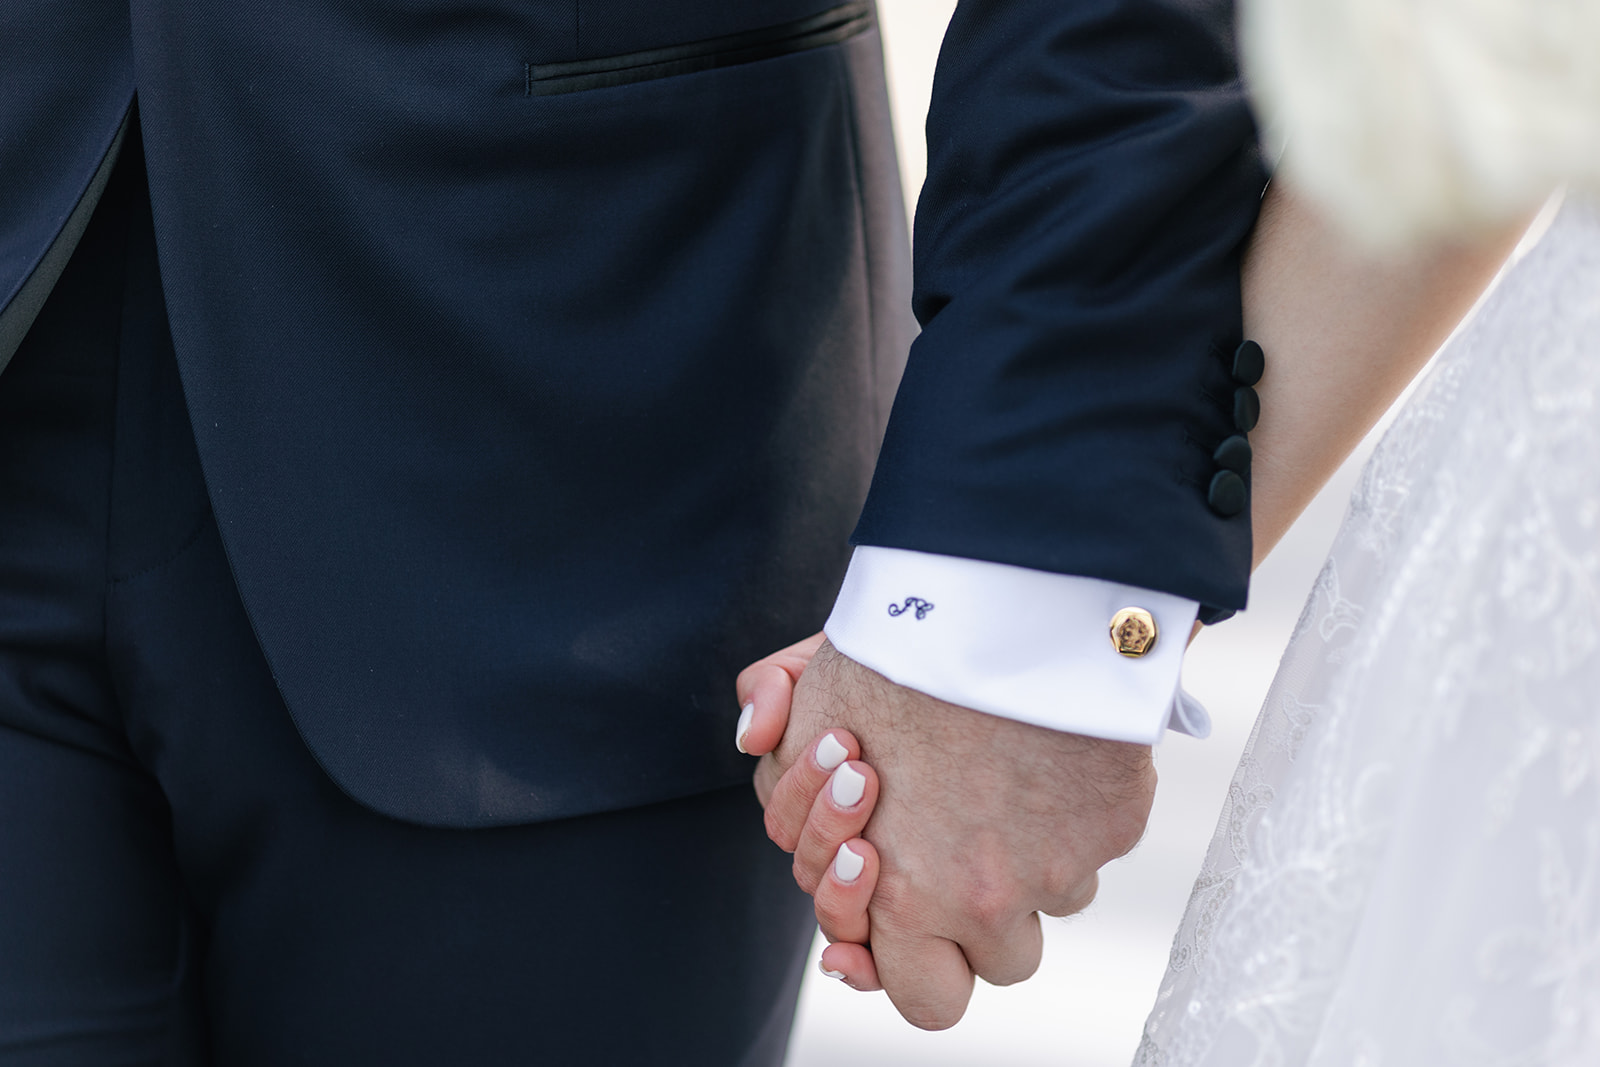 Details of newlyweds holding hands with custom cufflinks and embroidery on the suit